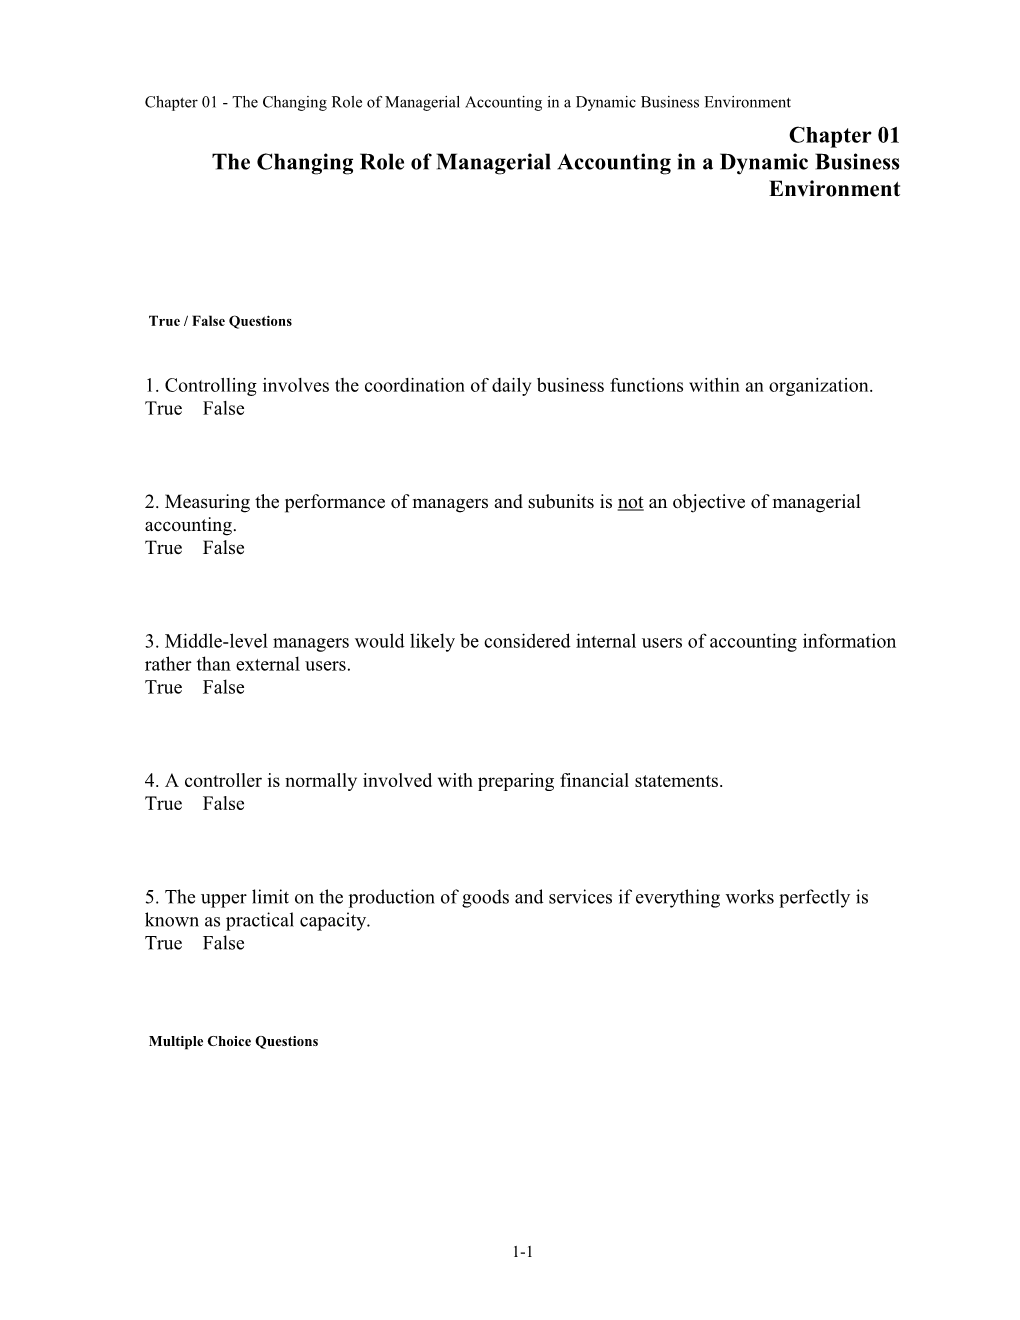 Chapter 01 the Changing Role of Managerial Accounting in a Dynamic Business Environment